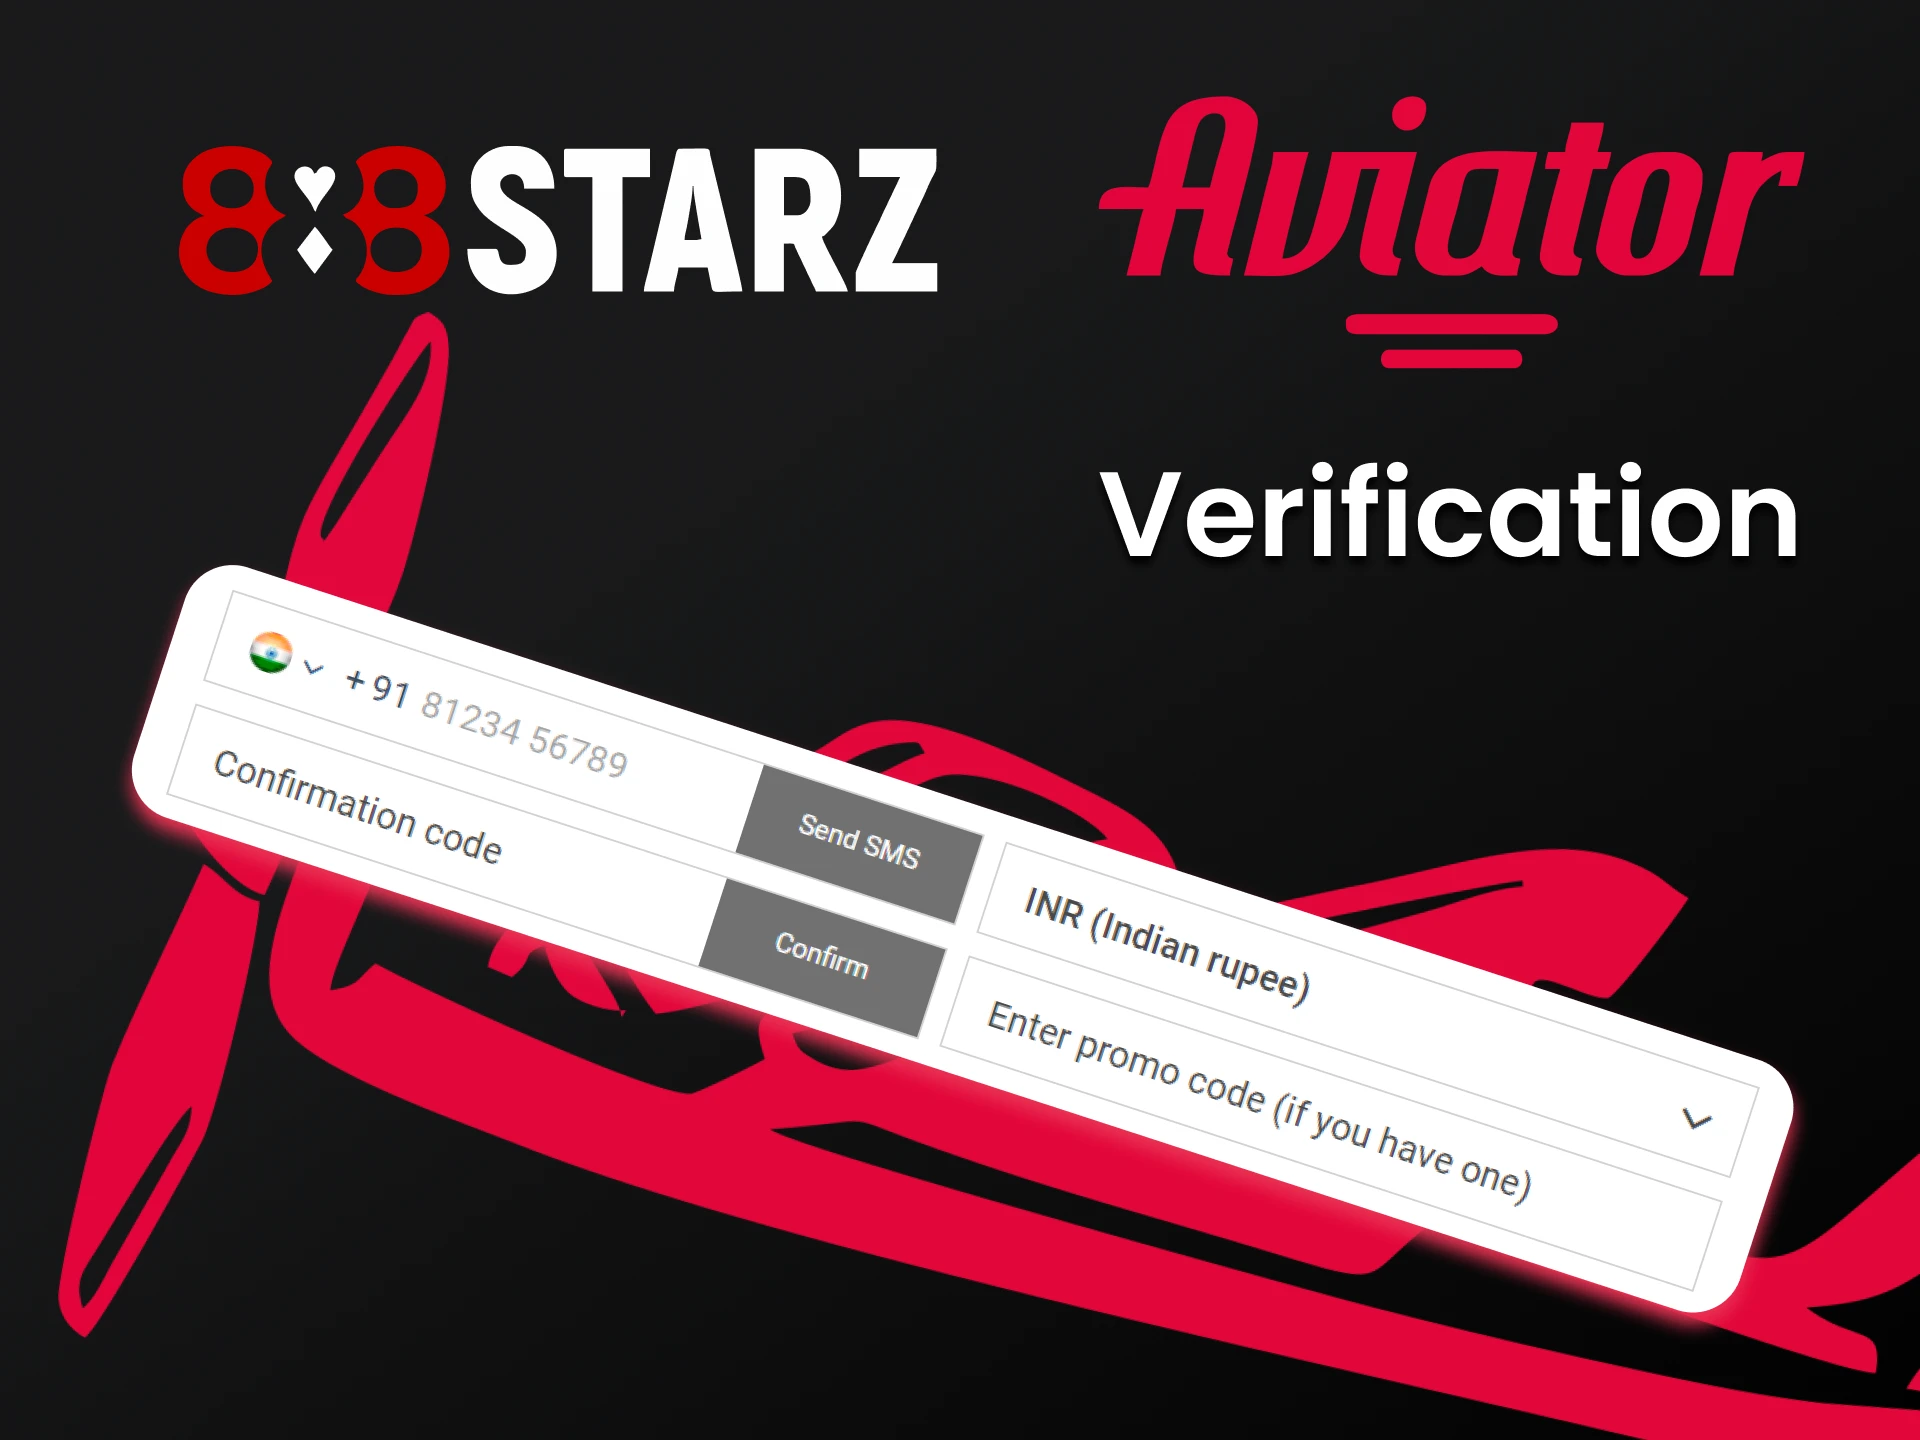 Fill in your personal data for the 888starz service.